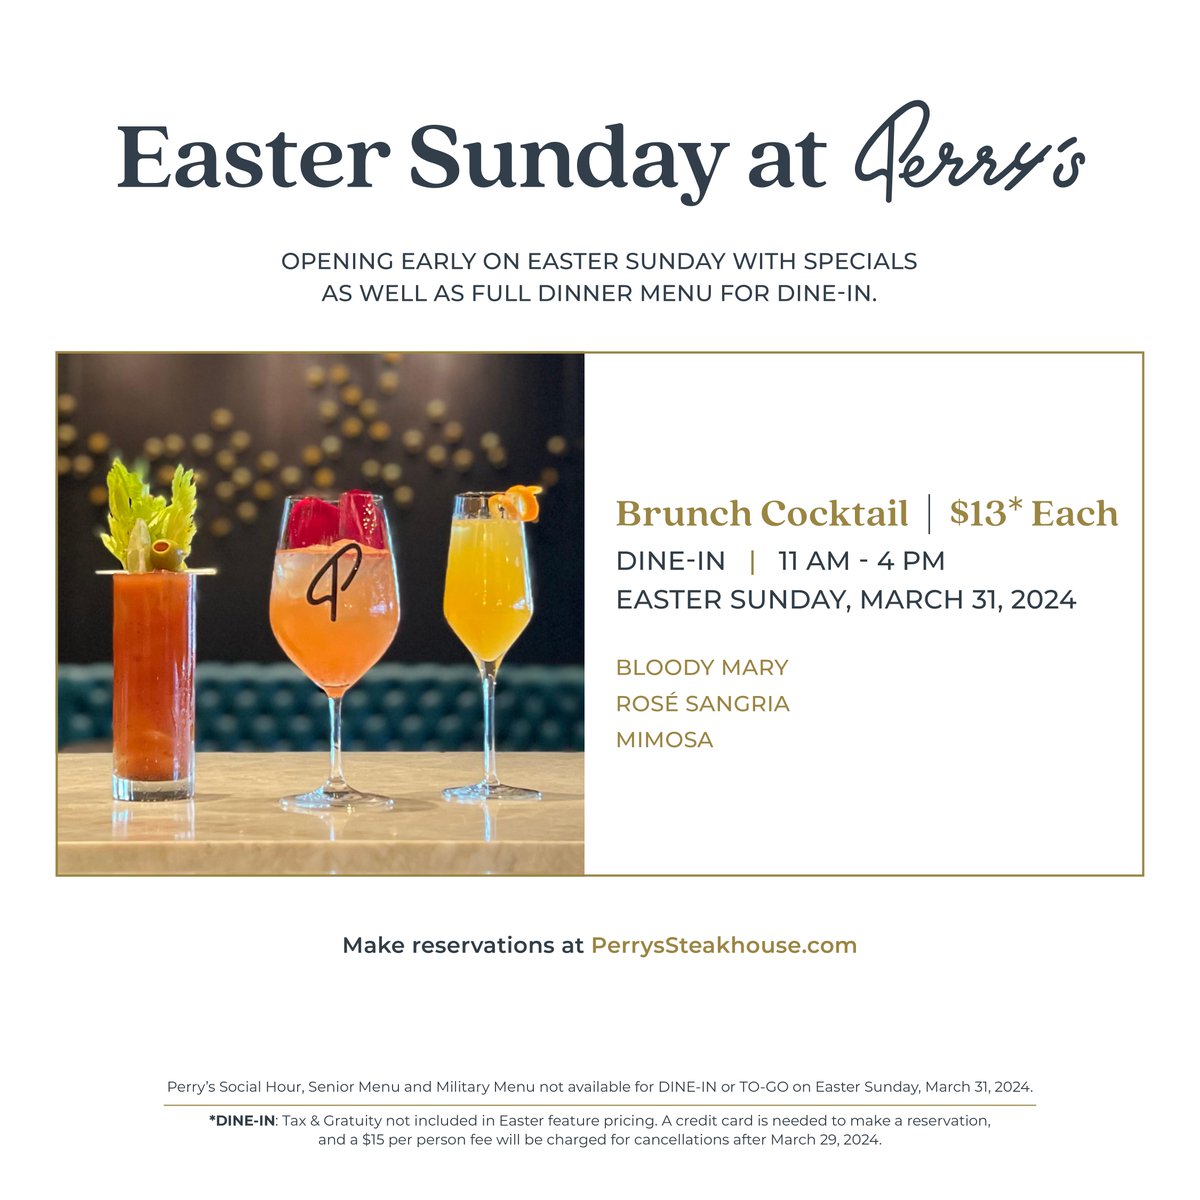 It’s not too late to plan your Easter feast at Perry’s!

Doors open at 11 am on Easter Sunday to savor Perry's Sliced, Double Smoked, Triple Glazed Ham, Full Dinner Menu, Pork Chop Sunday Supper, Brunch Cocktails, and more!

Make a reservation at:
perryssteakhouse.com/specials/easte…